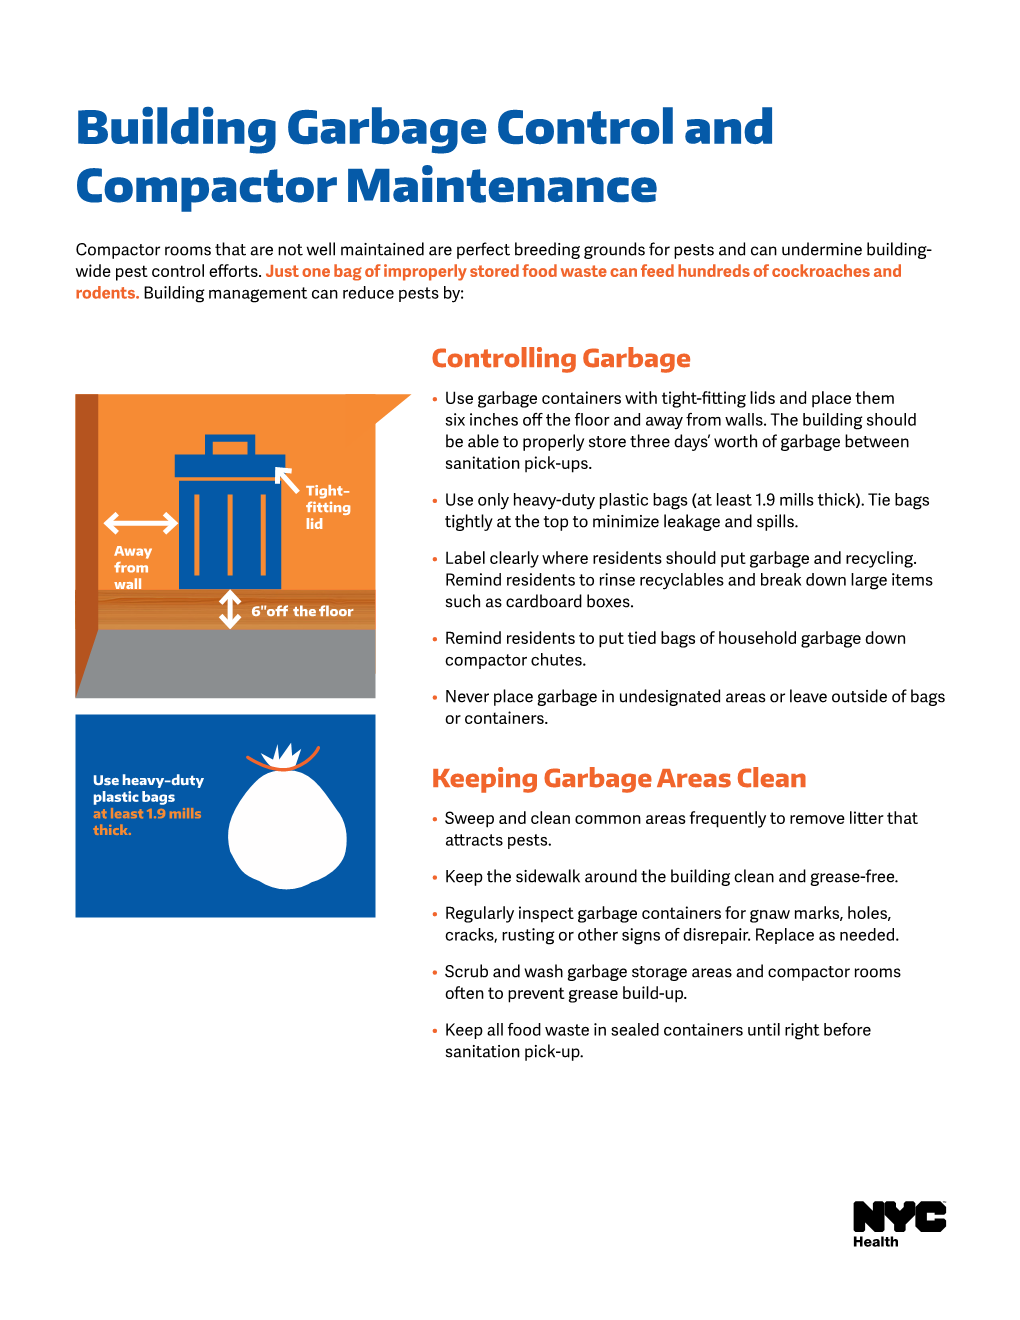 Building Garbage Control and Compactor Maintenance